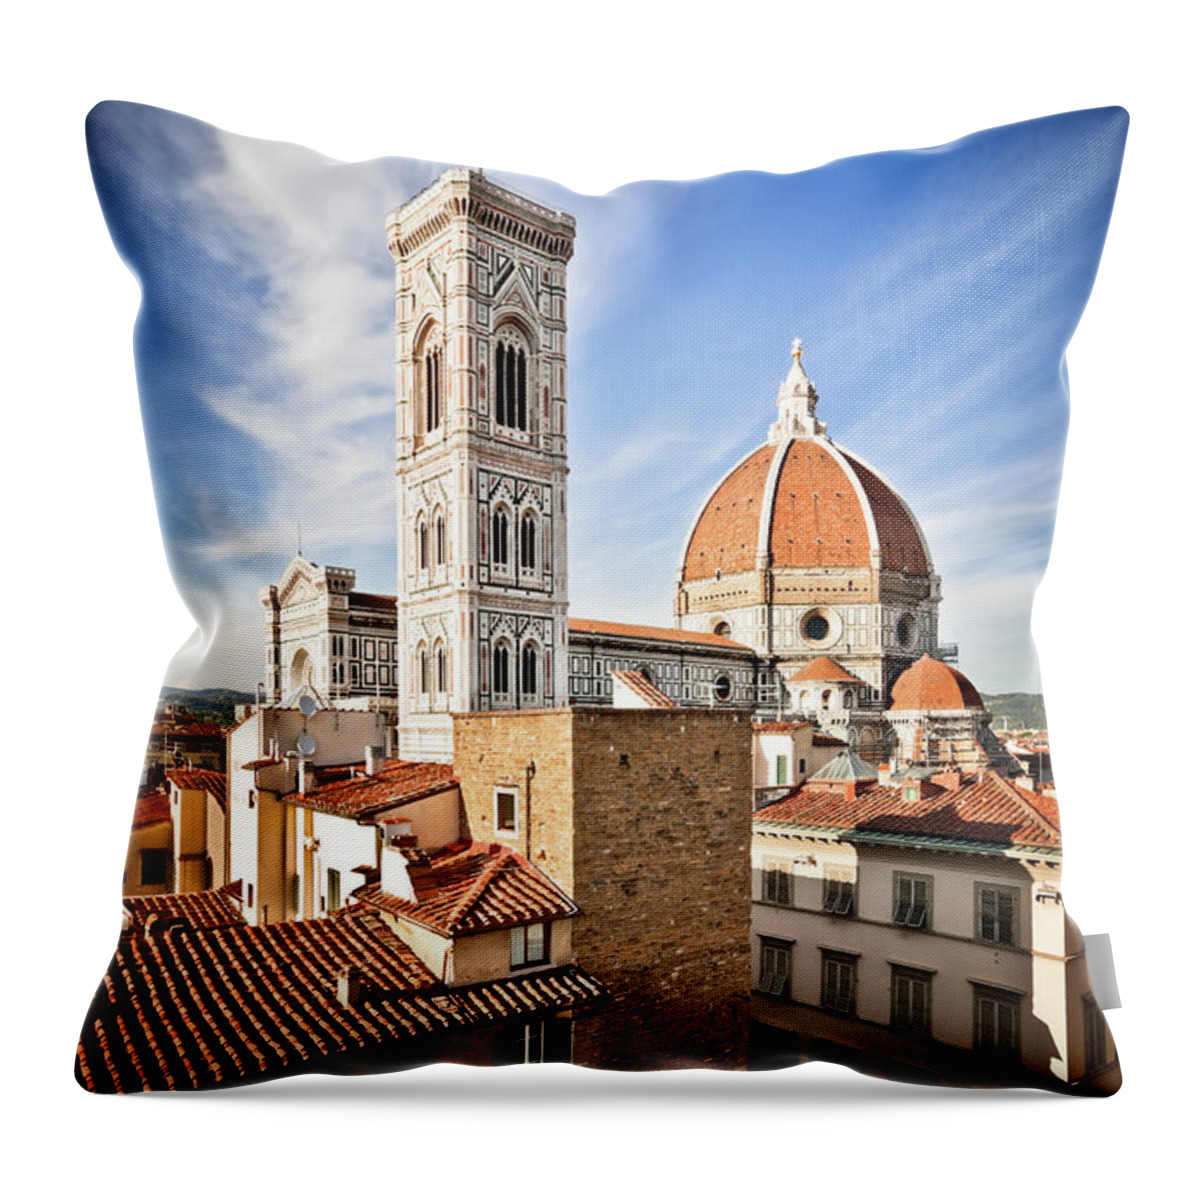 Campanile Throw Pillow featuring the photograph Florence Dome Above The City, Italian by Giorgiomagini